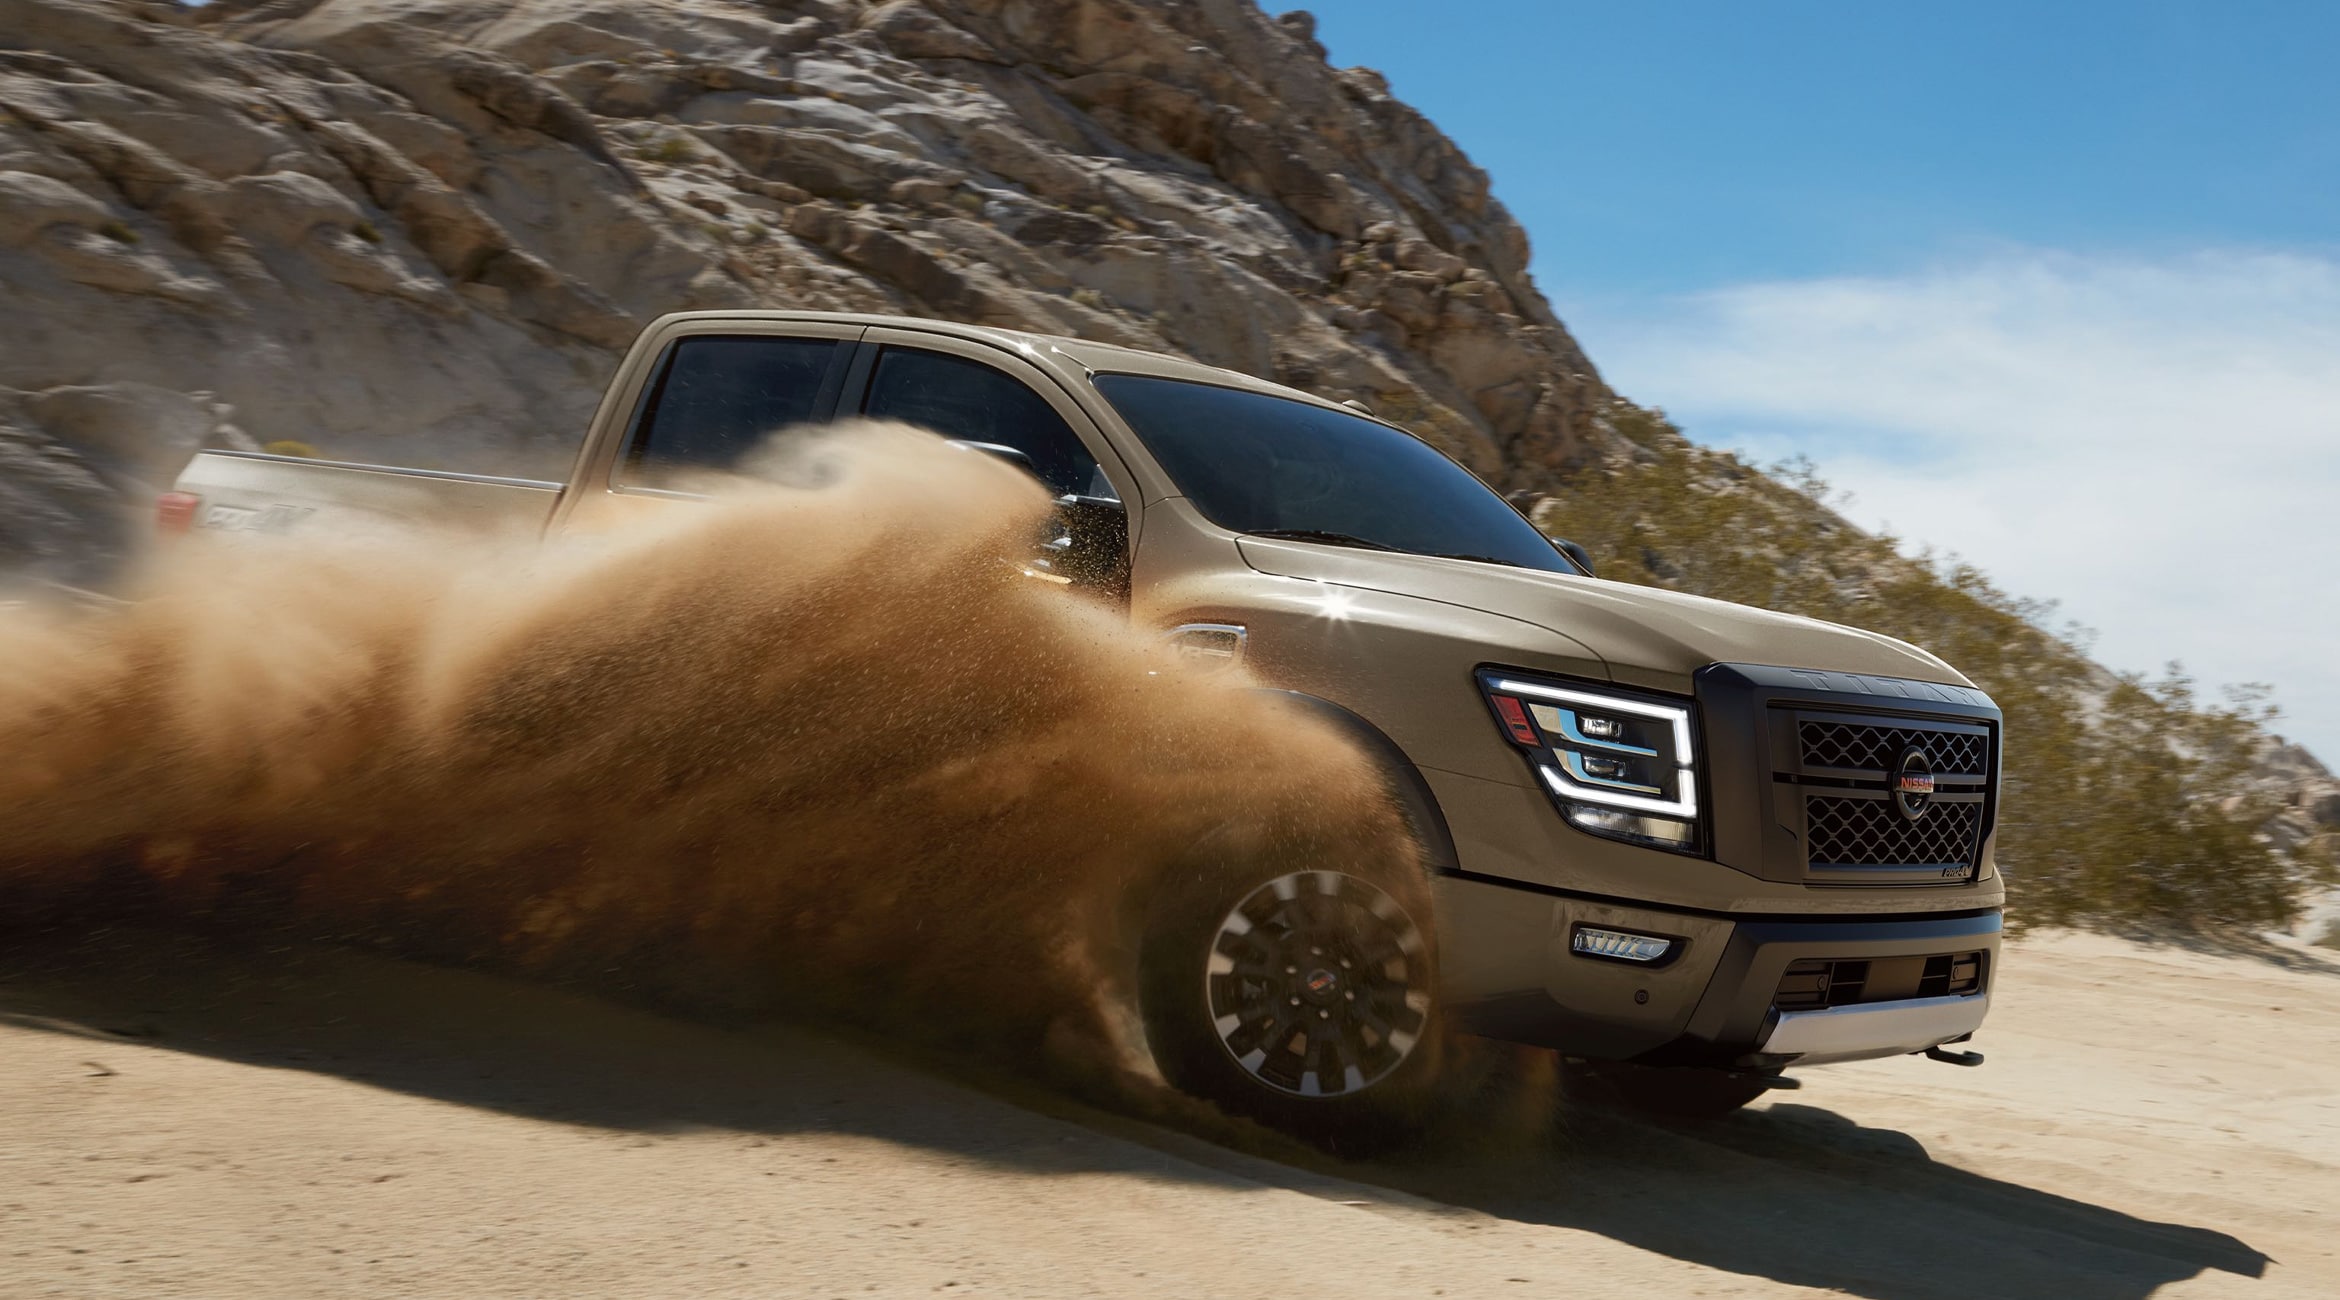 A brown Nissan Titan Truck driving in the sand